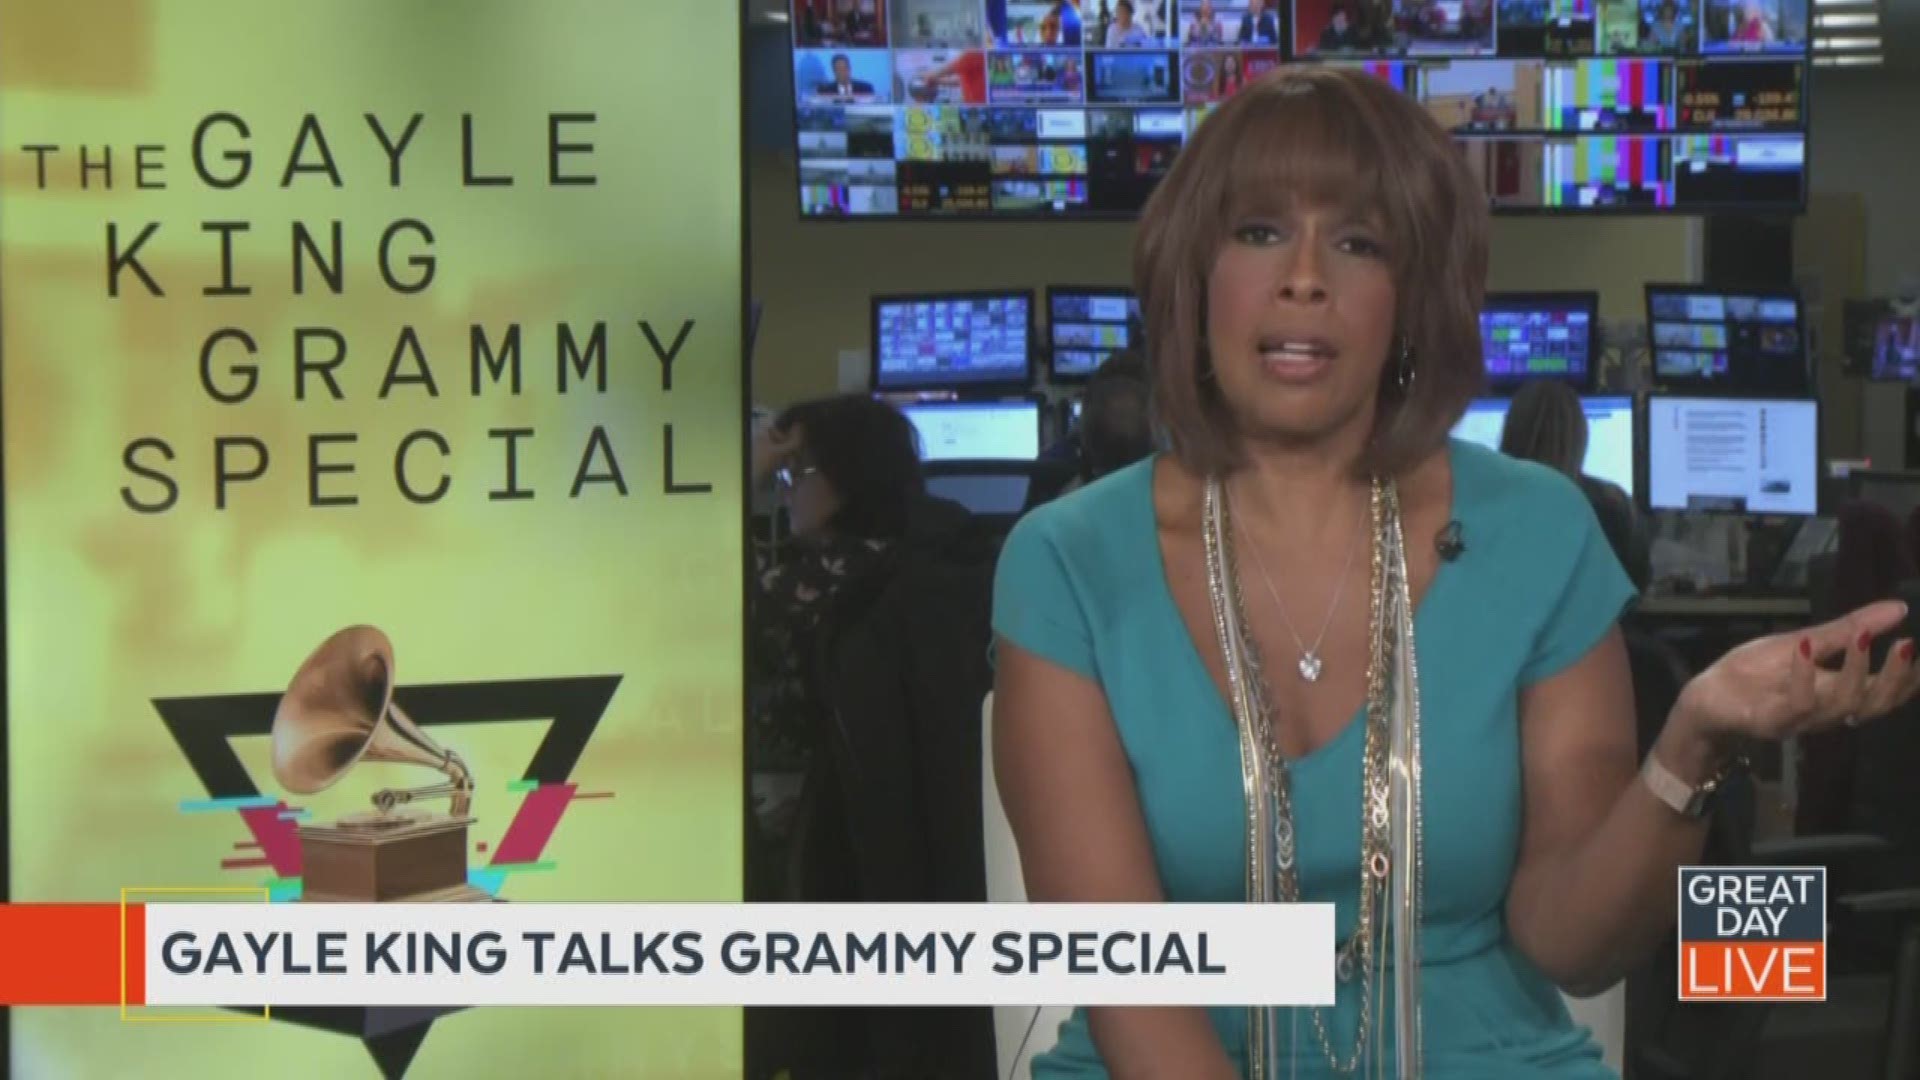 The 62nd GRAMMY Awards hosted by CBS on Sunday, Jan 26 at 8 PM ET.